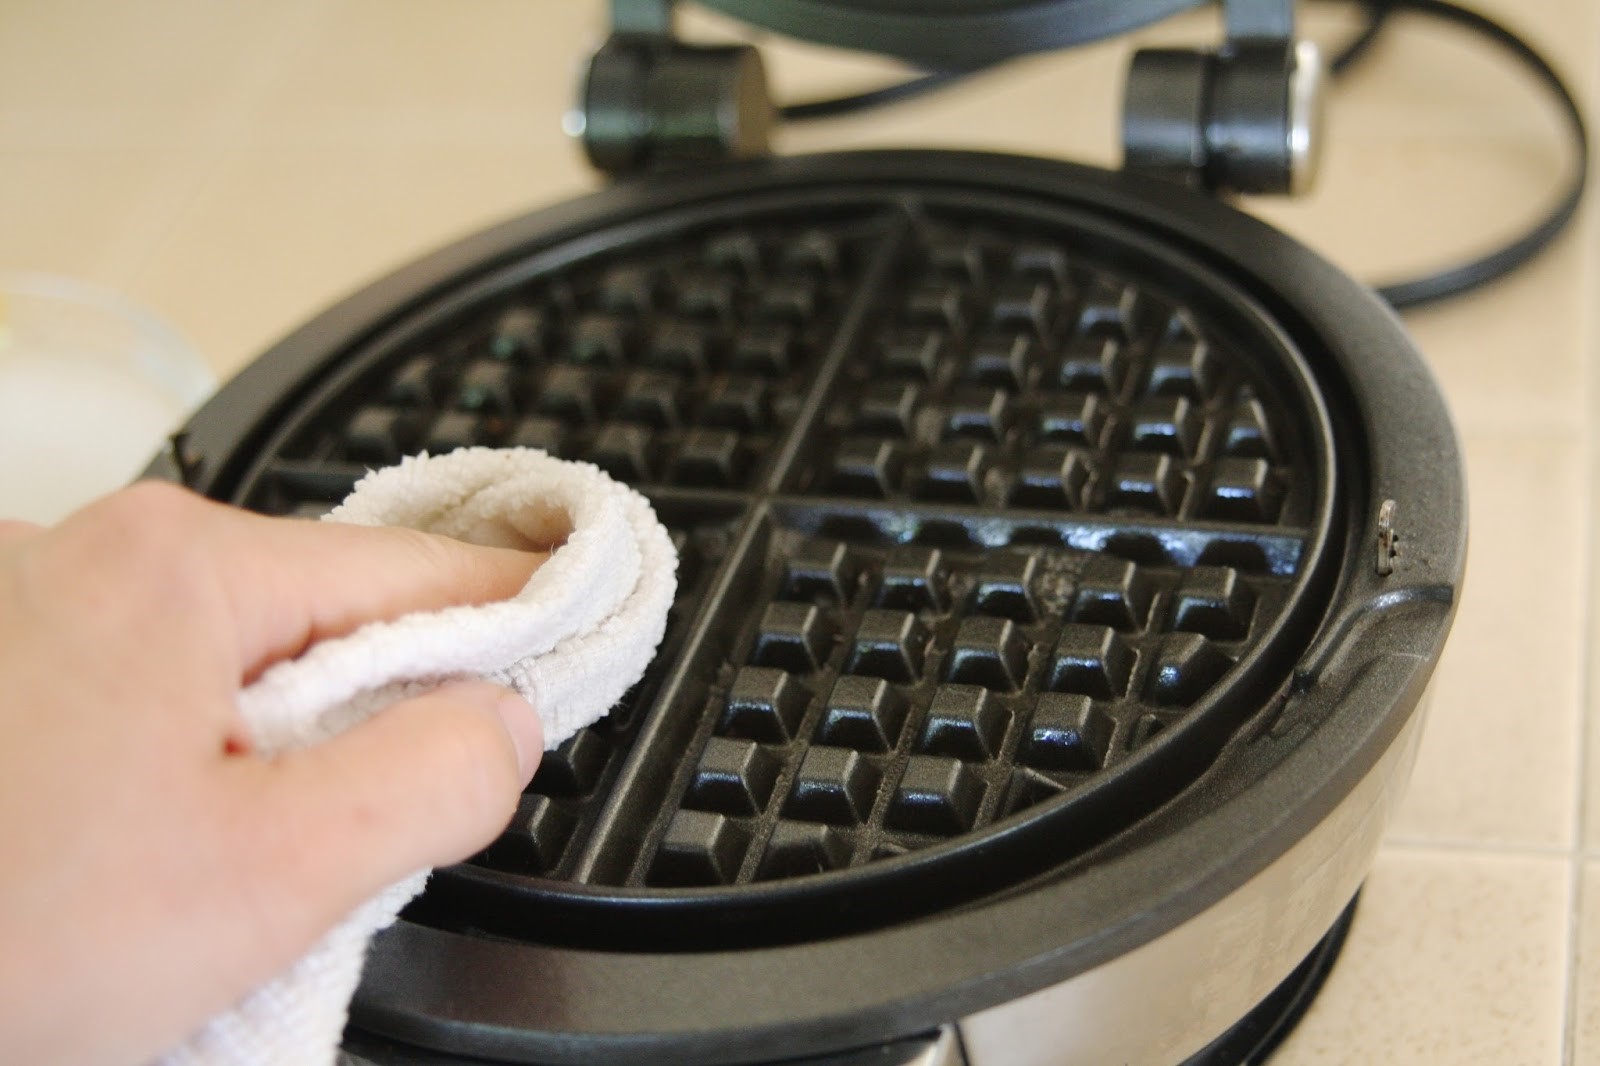 How To Clean The Black Stuff Off The Waffle Iron